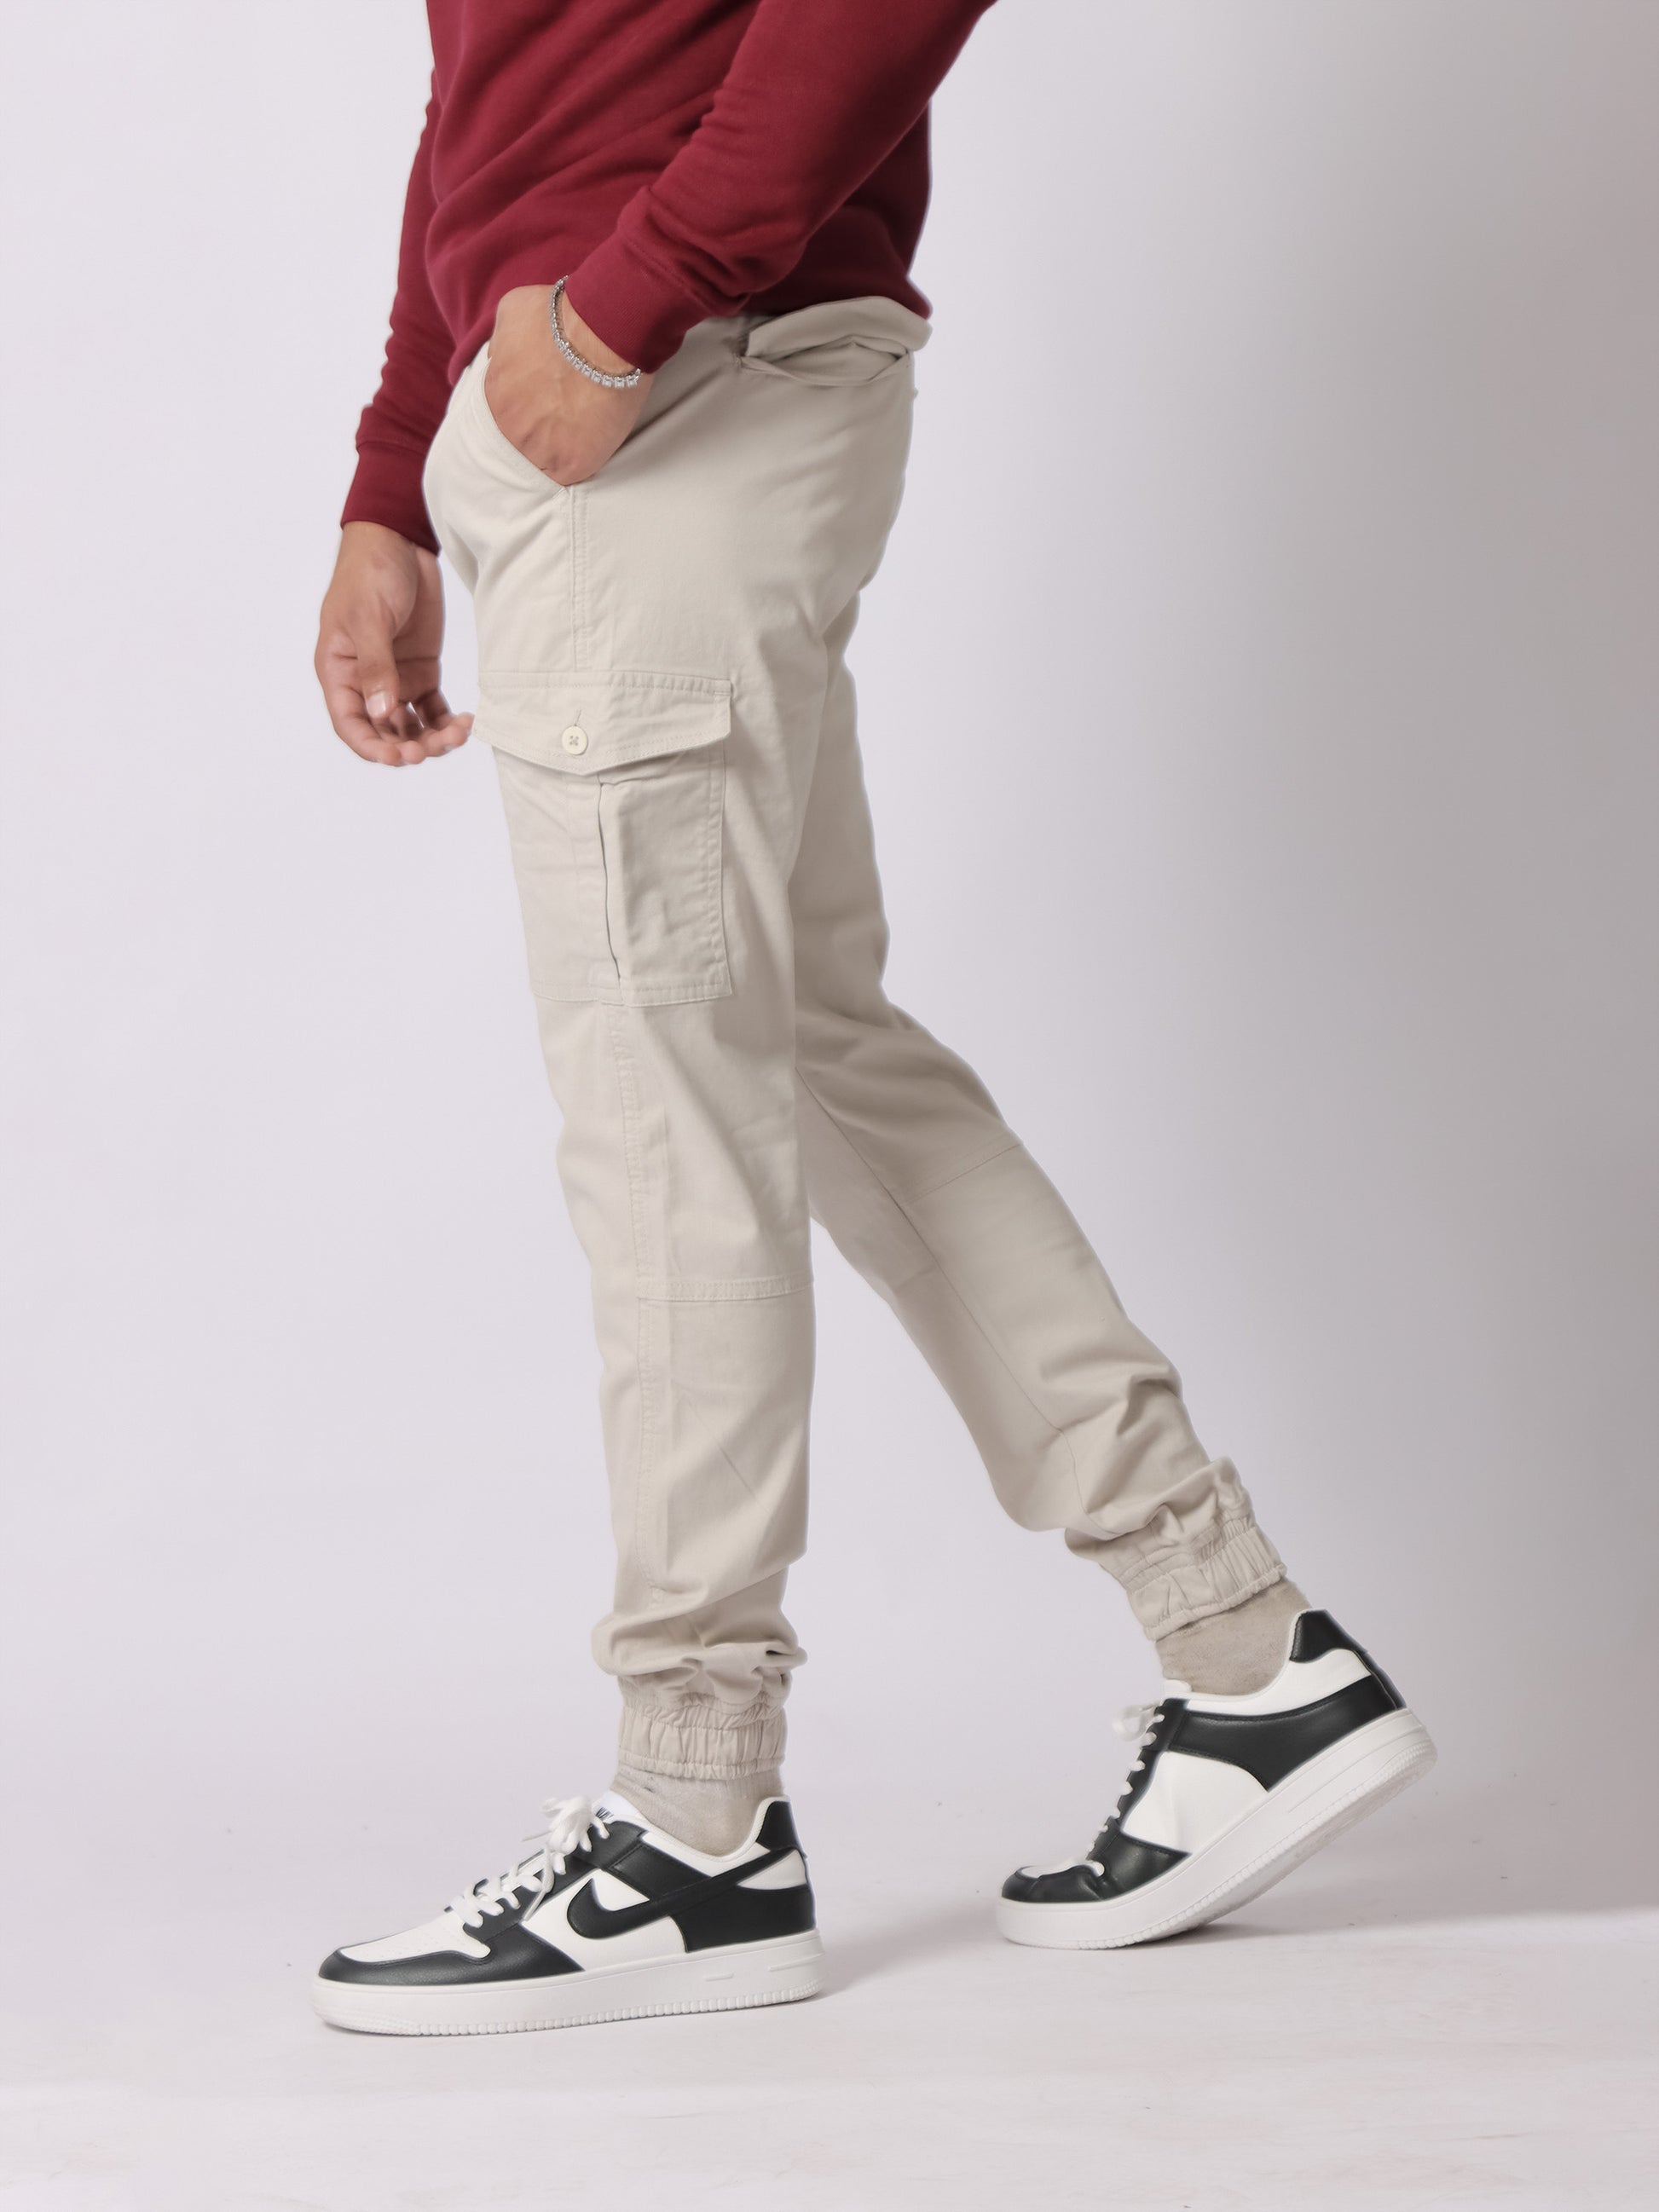 Off White Woven Cargo Pants for men in Pakistan